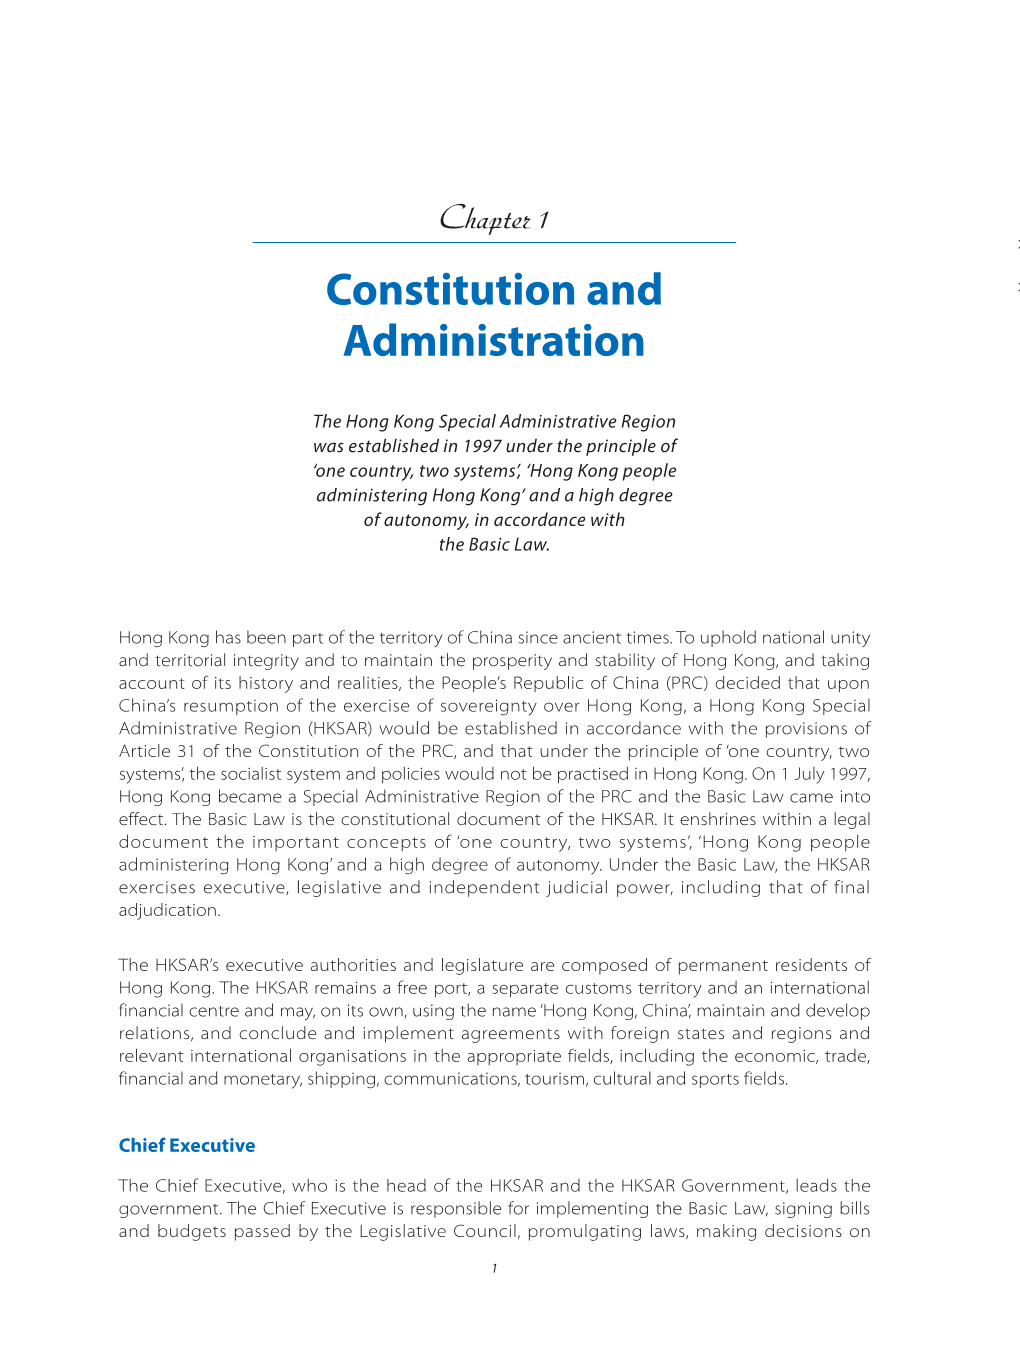 Constitution and Administration